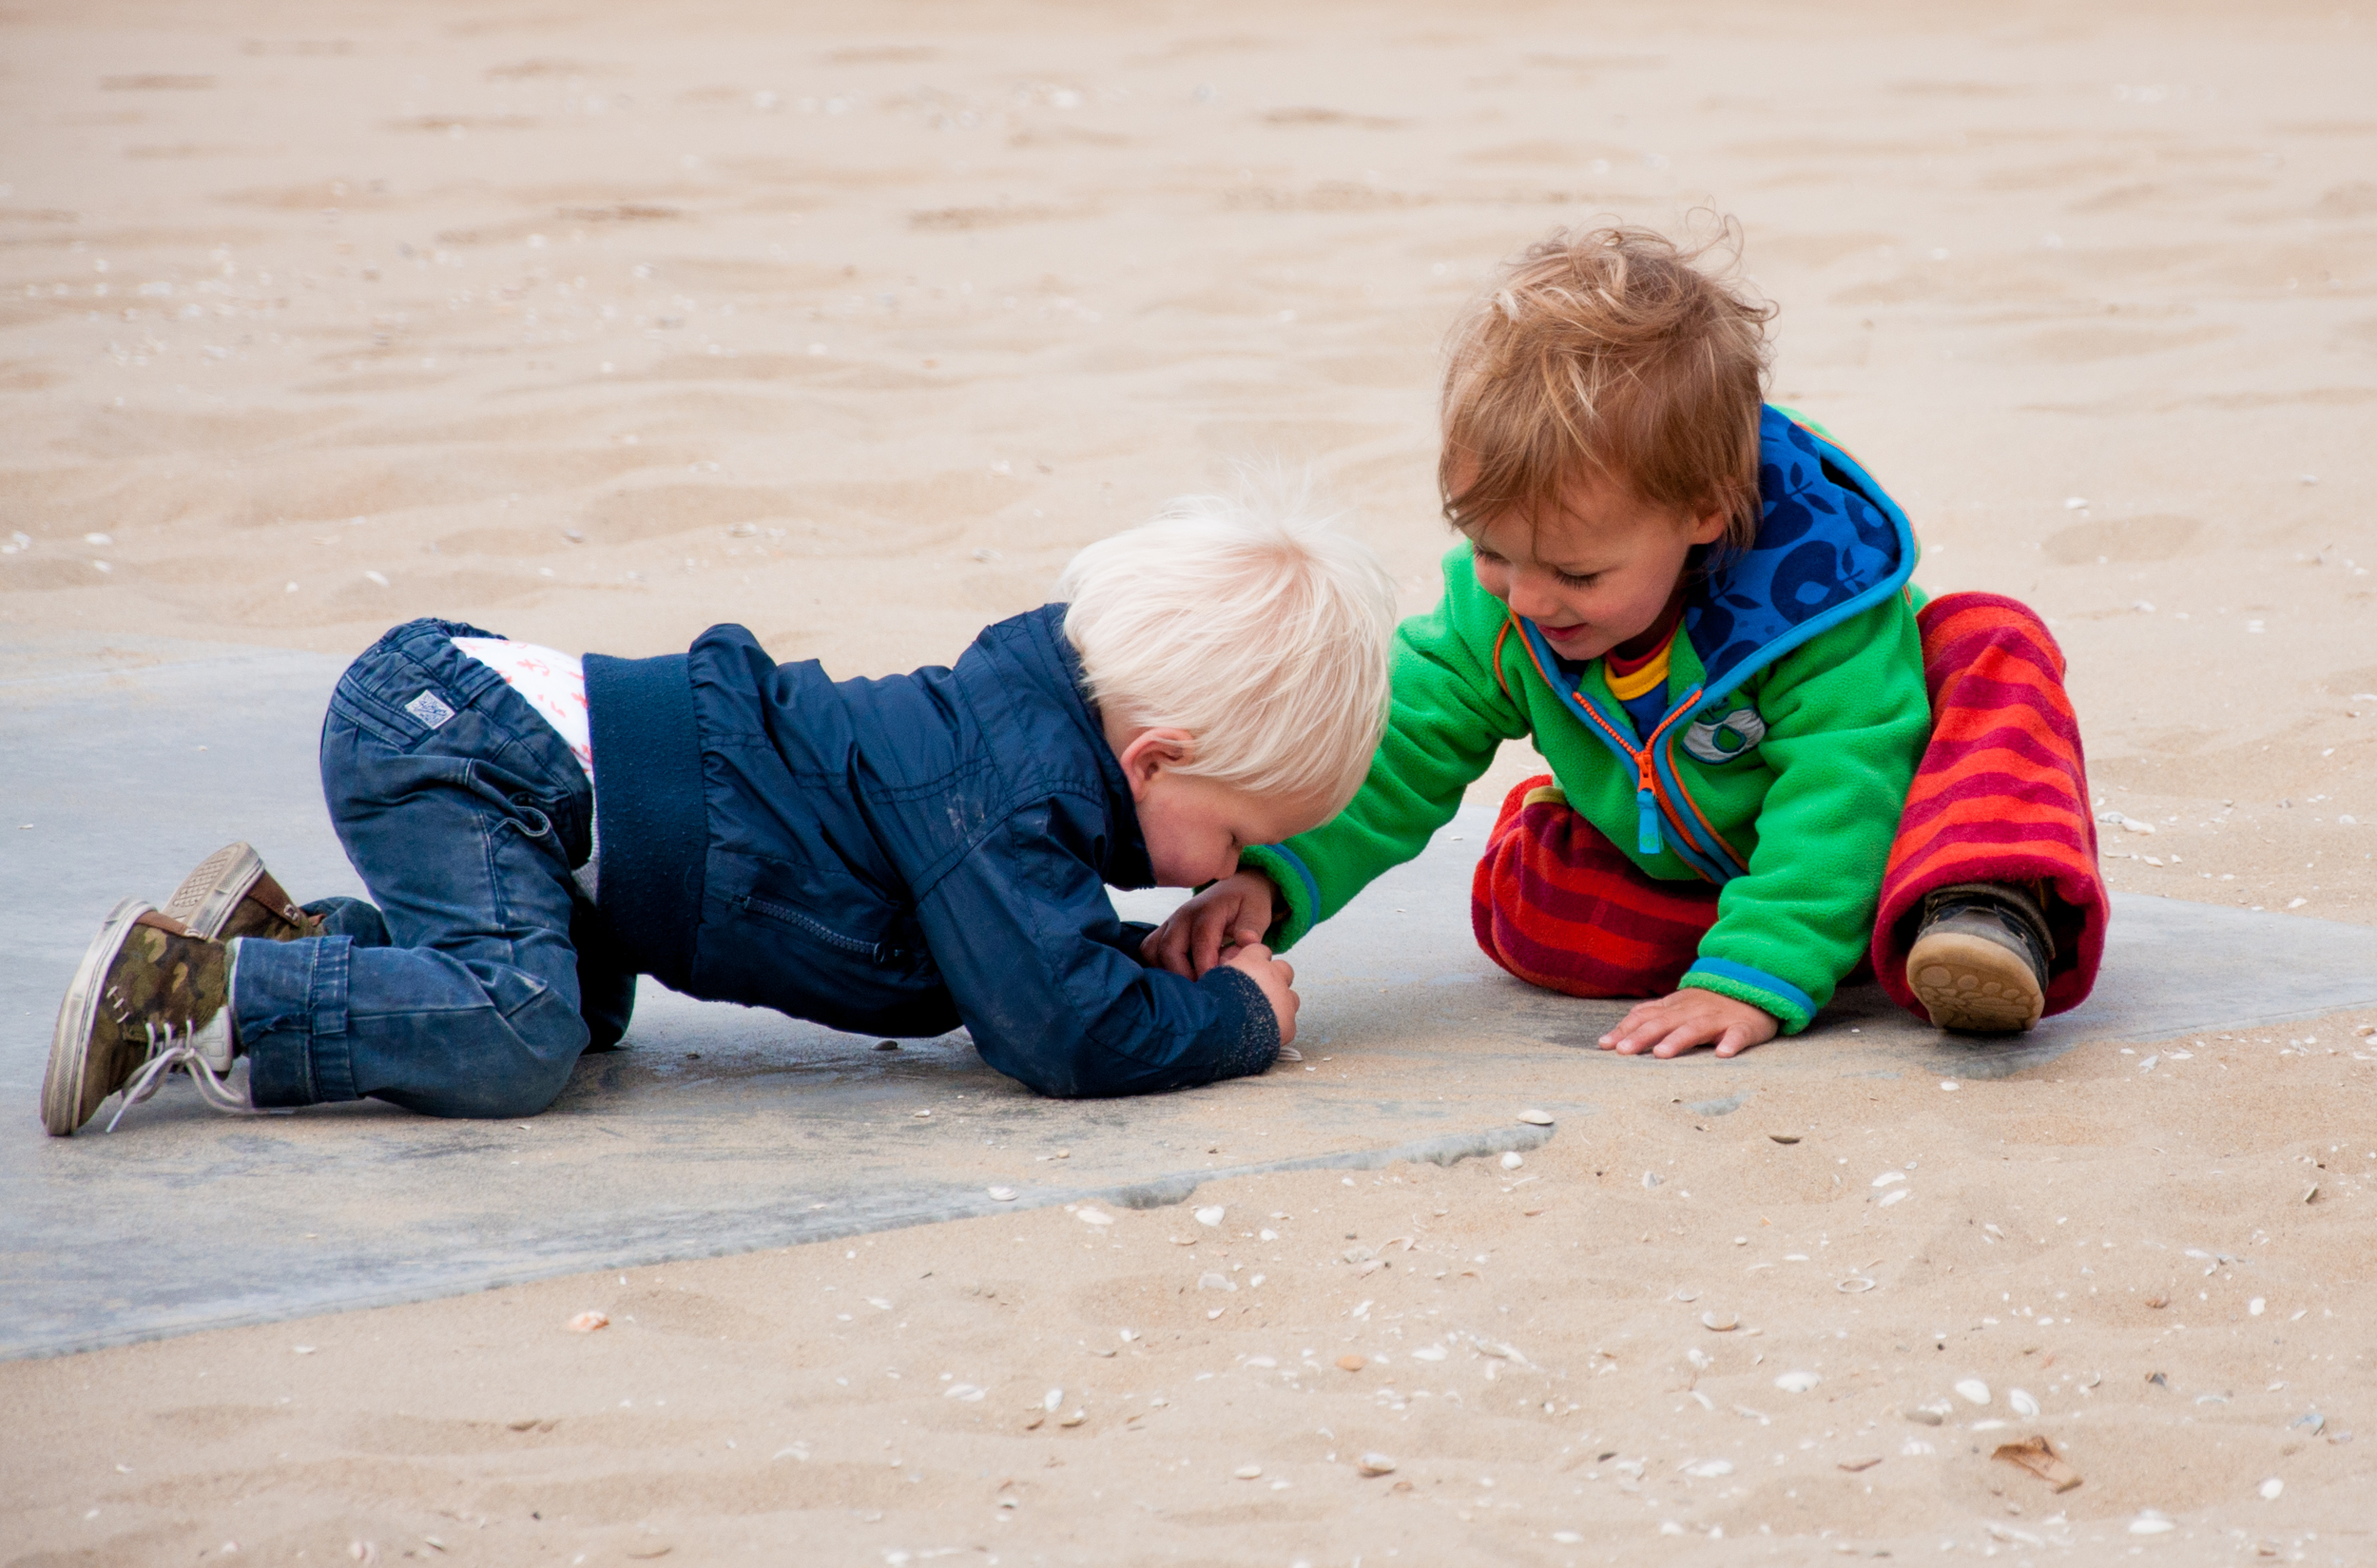 Kids playing on the beach photo